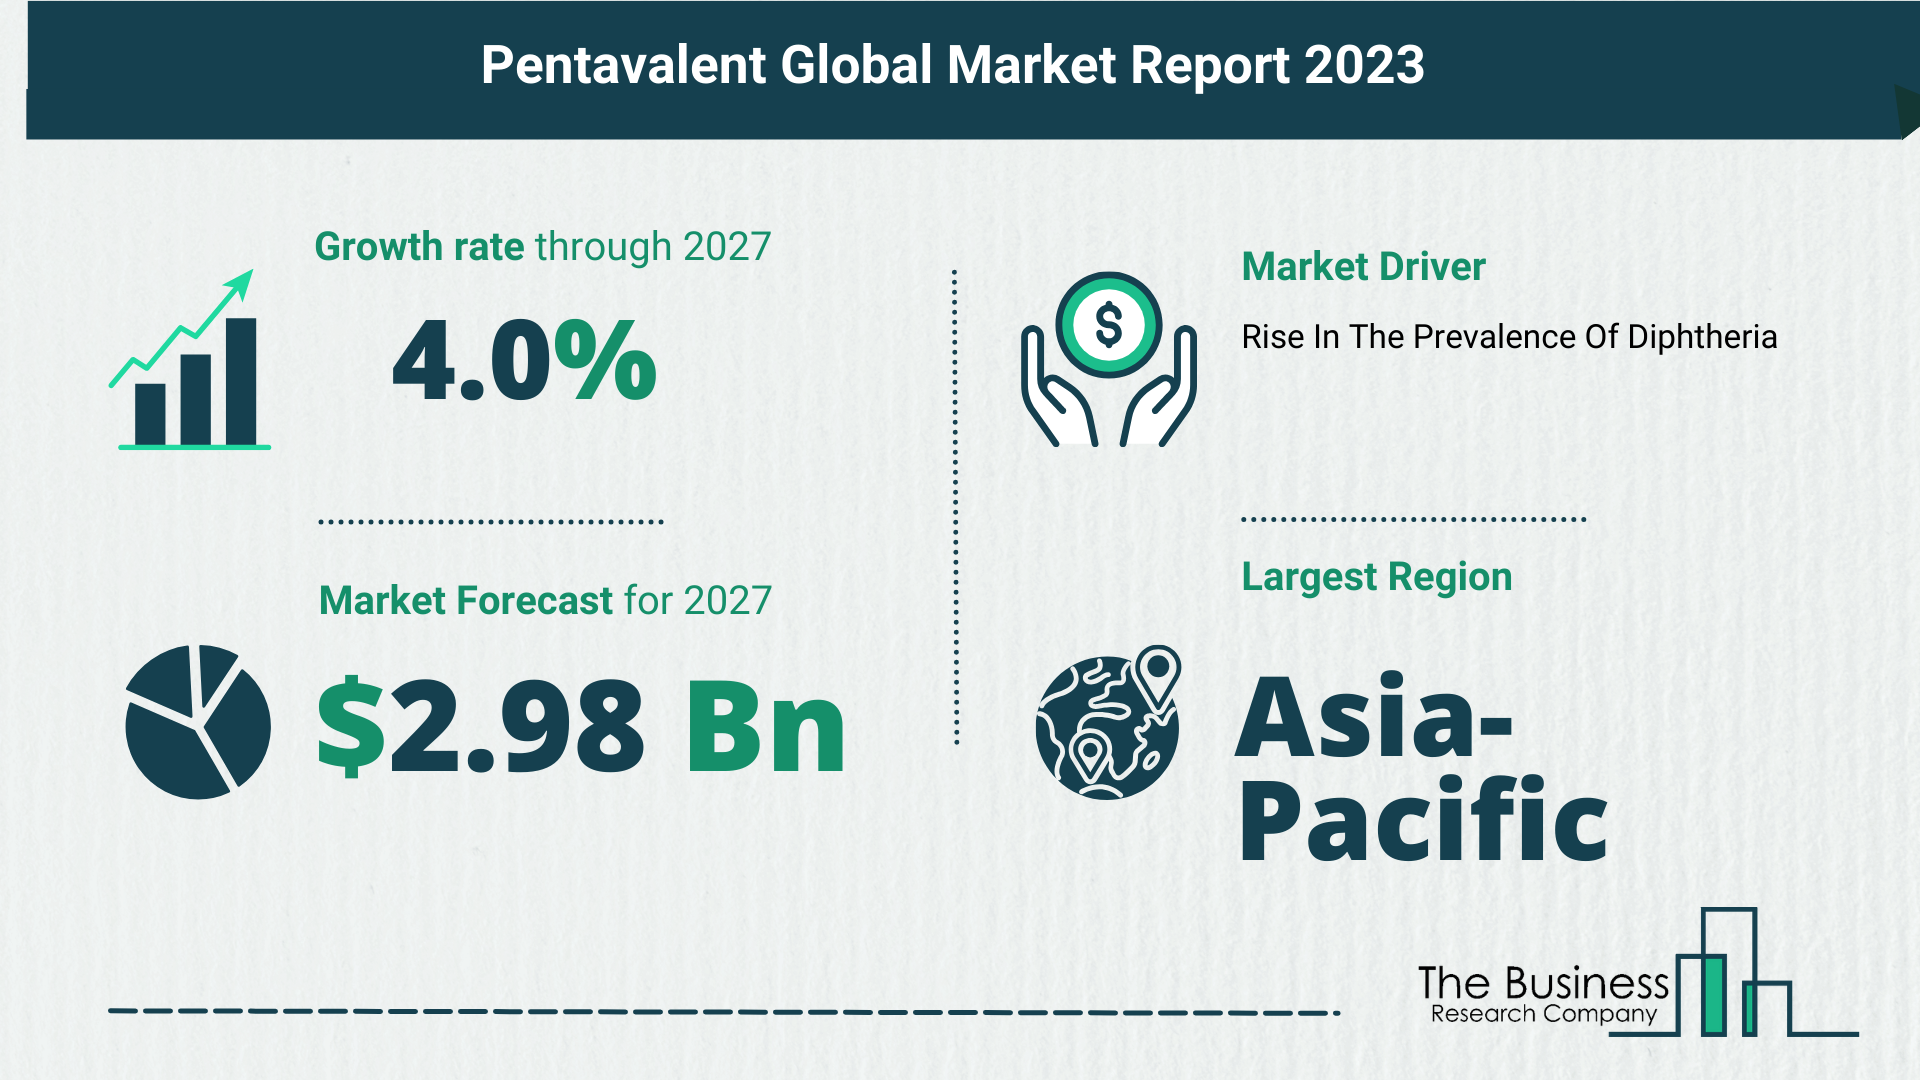 What Is The Forecast Growth Rate For The Pentavalent Market?